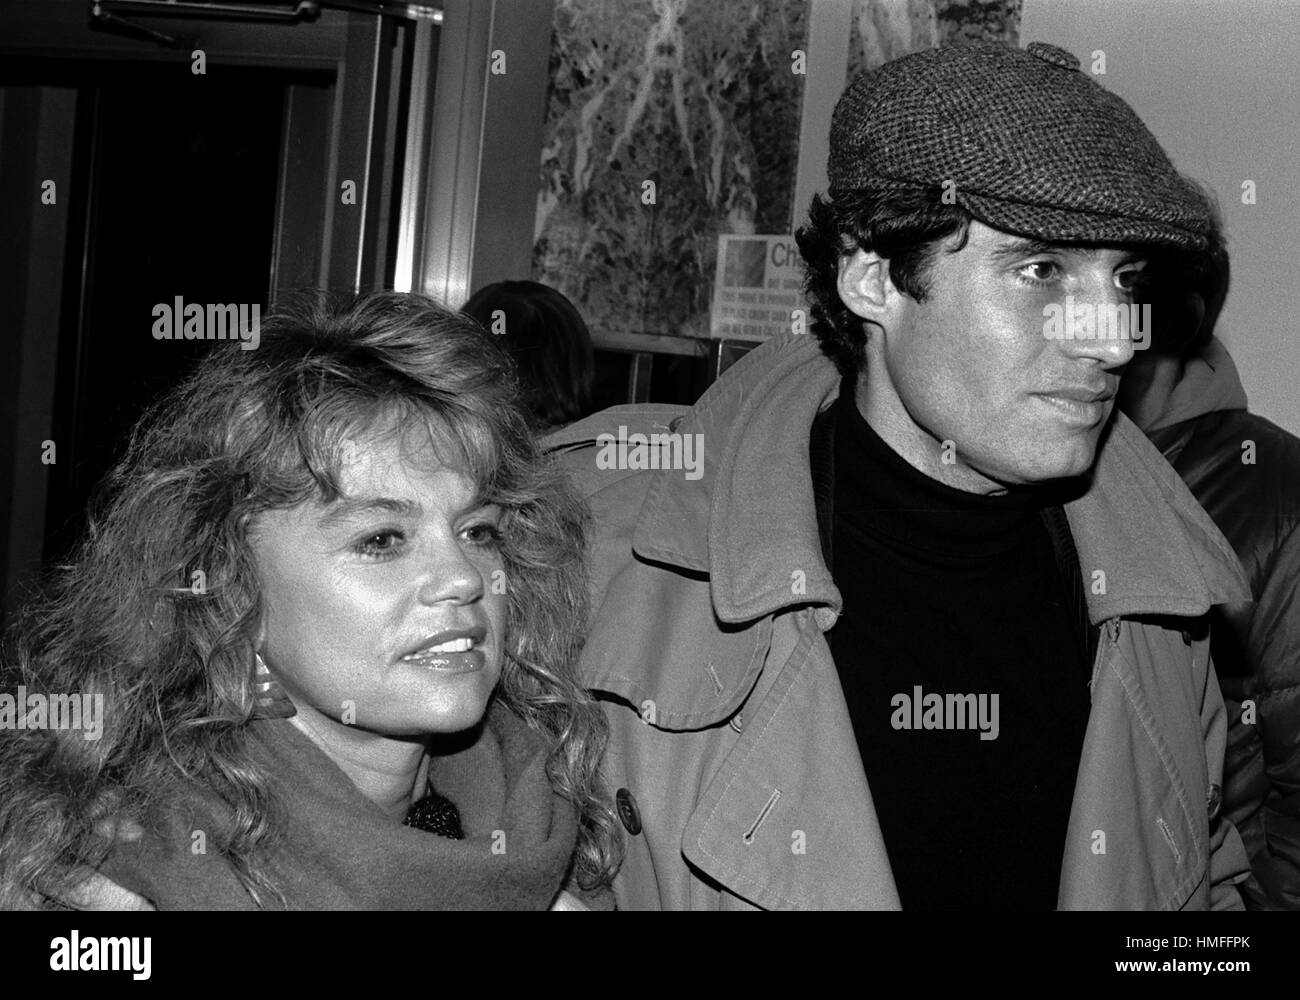 Michael Nouri & Dyan Cannon attending the Opening Night Performance of thye new Broadway Hit Musical DREAMGIRLS at the Imperial Theatre in New York City. December 20, 1981 Stock Photo